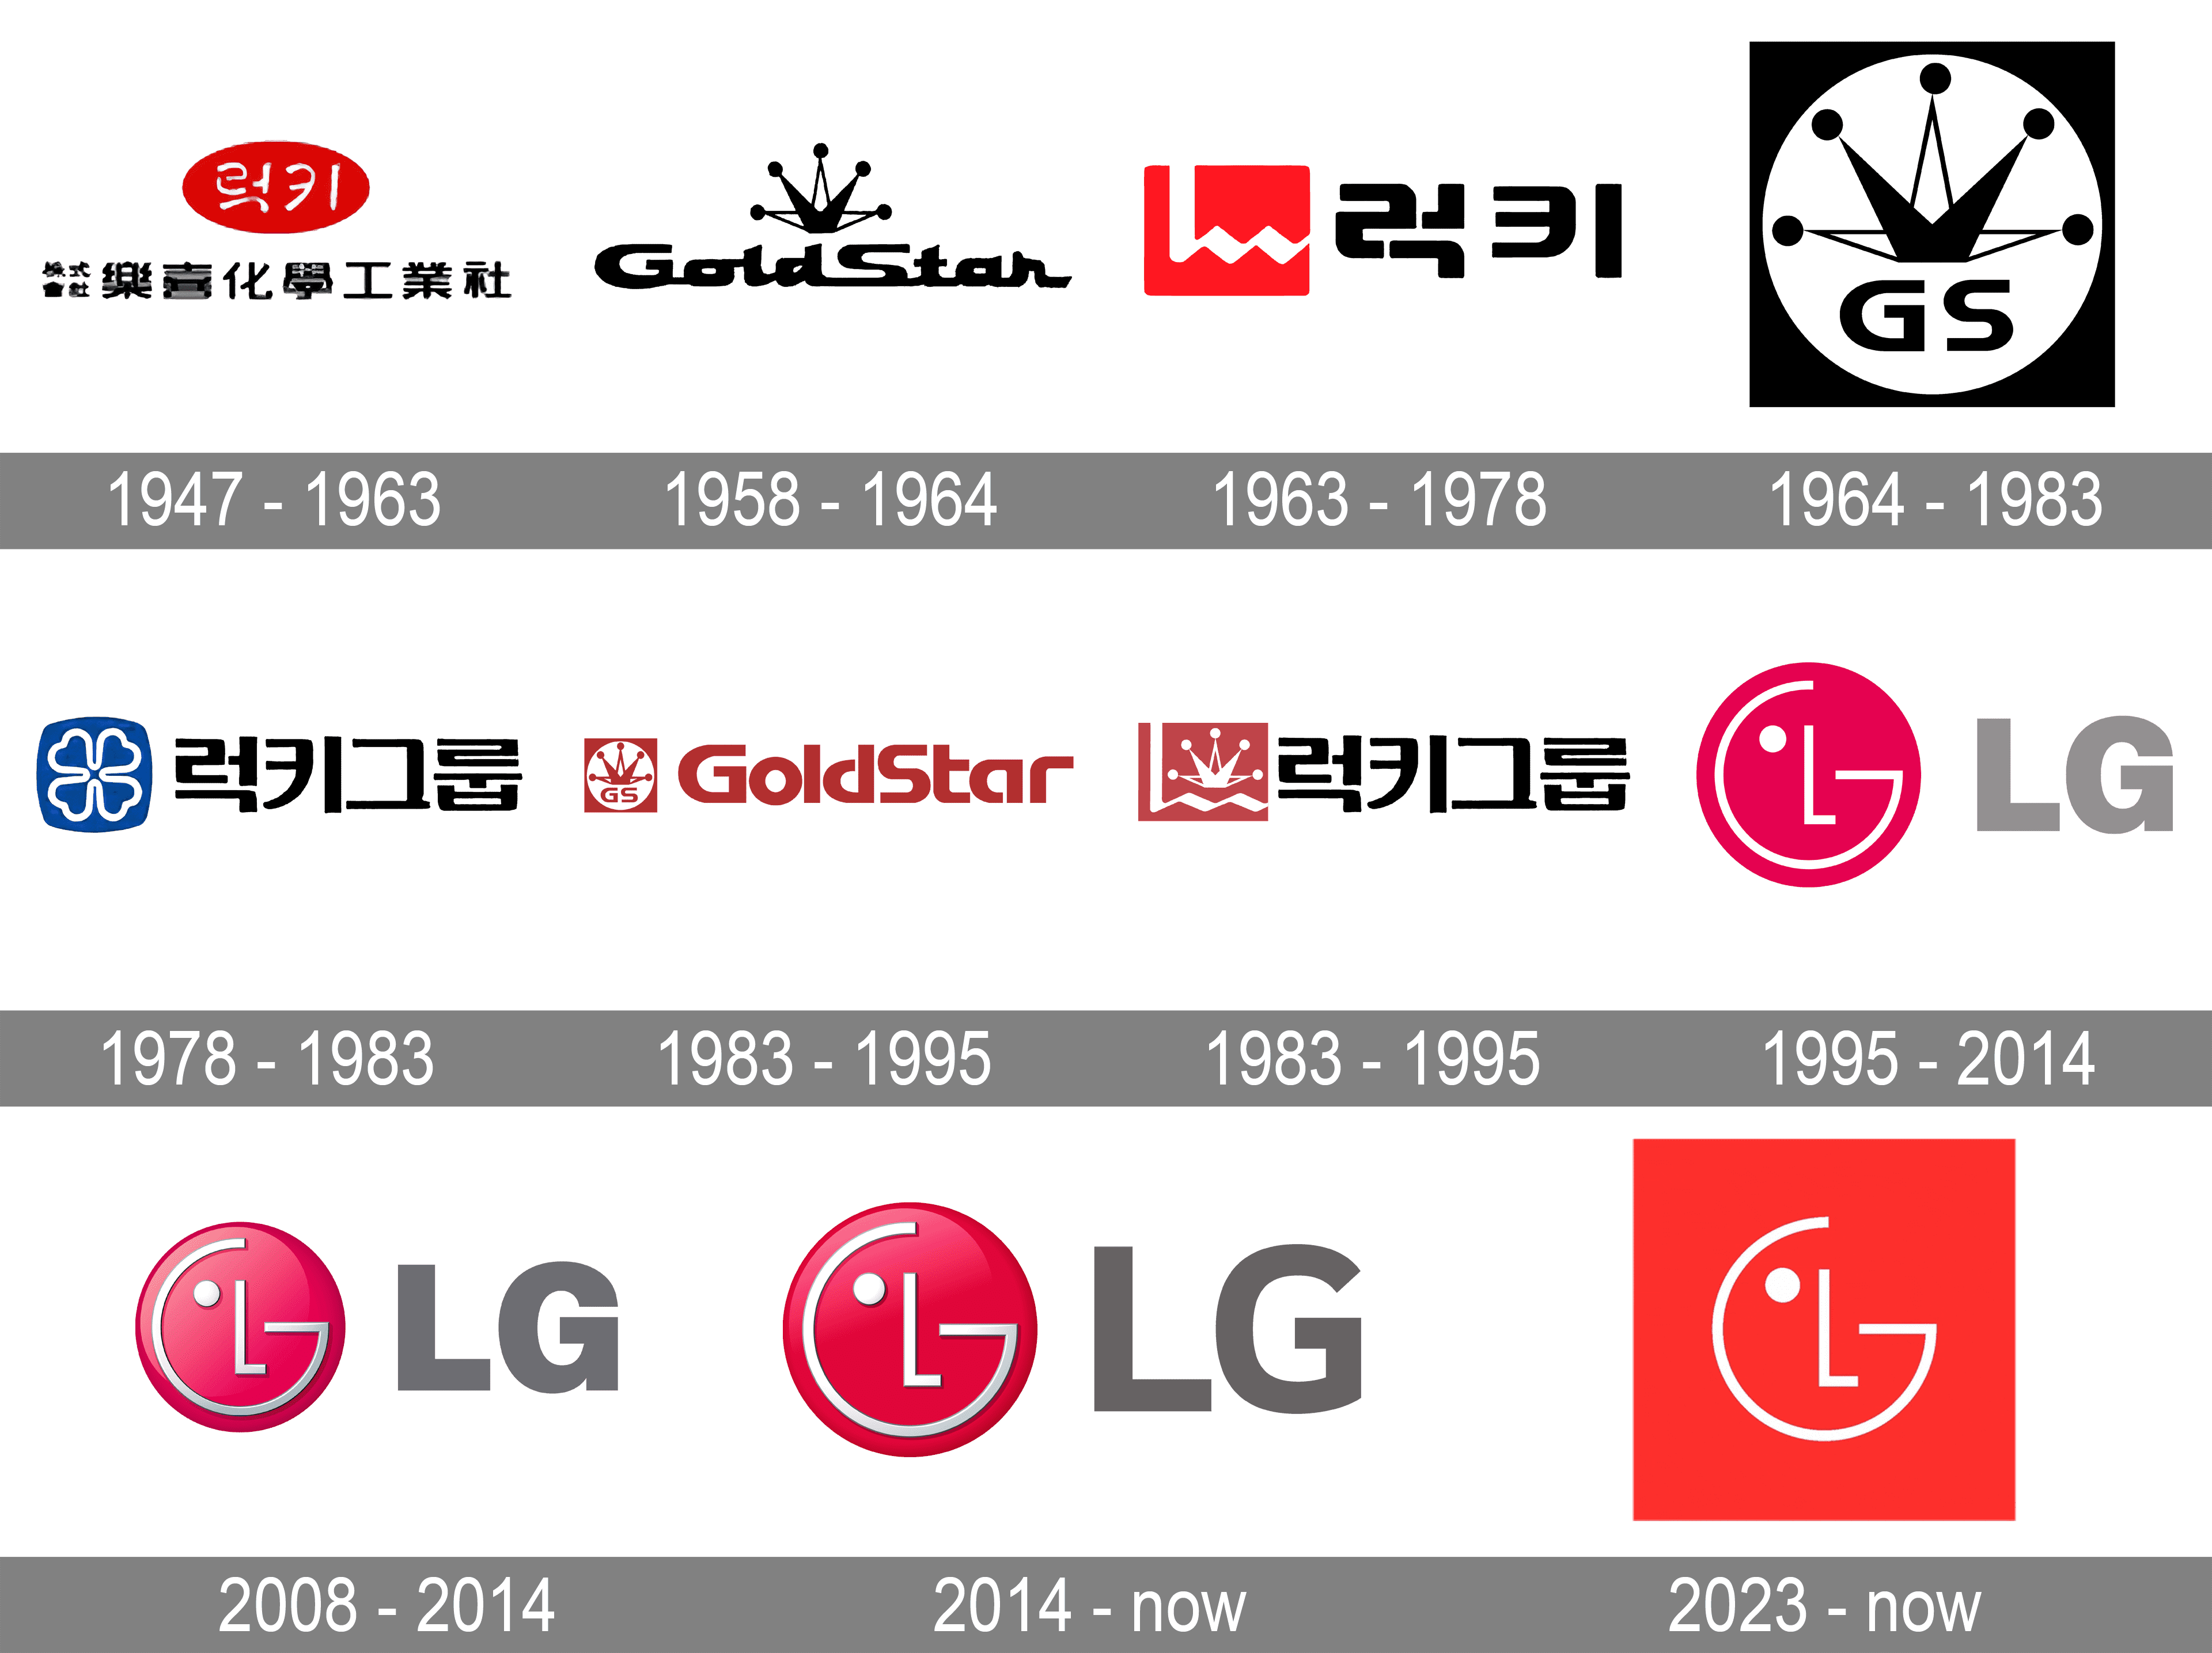 LG Logo and symbol, meaning, history, PNG, brand